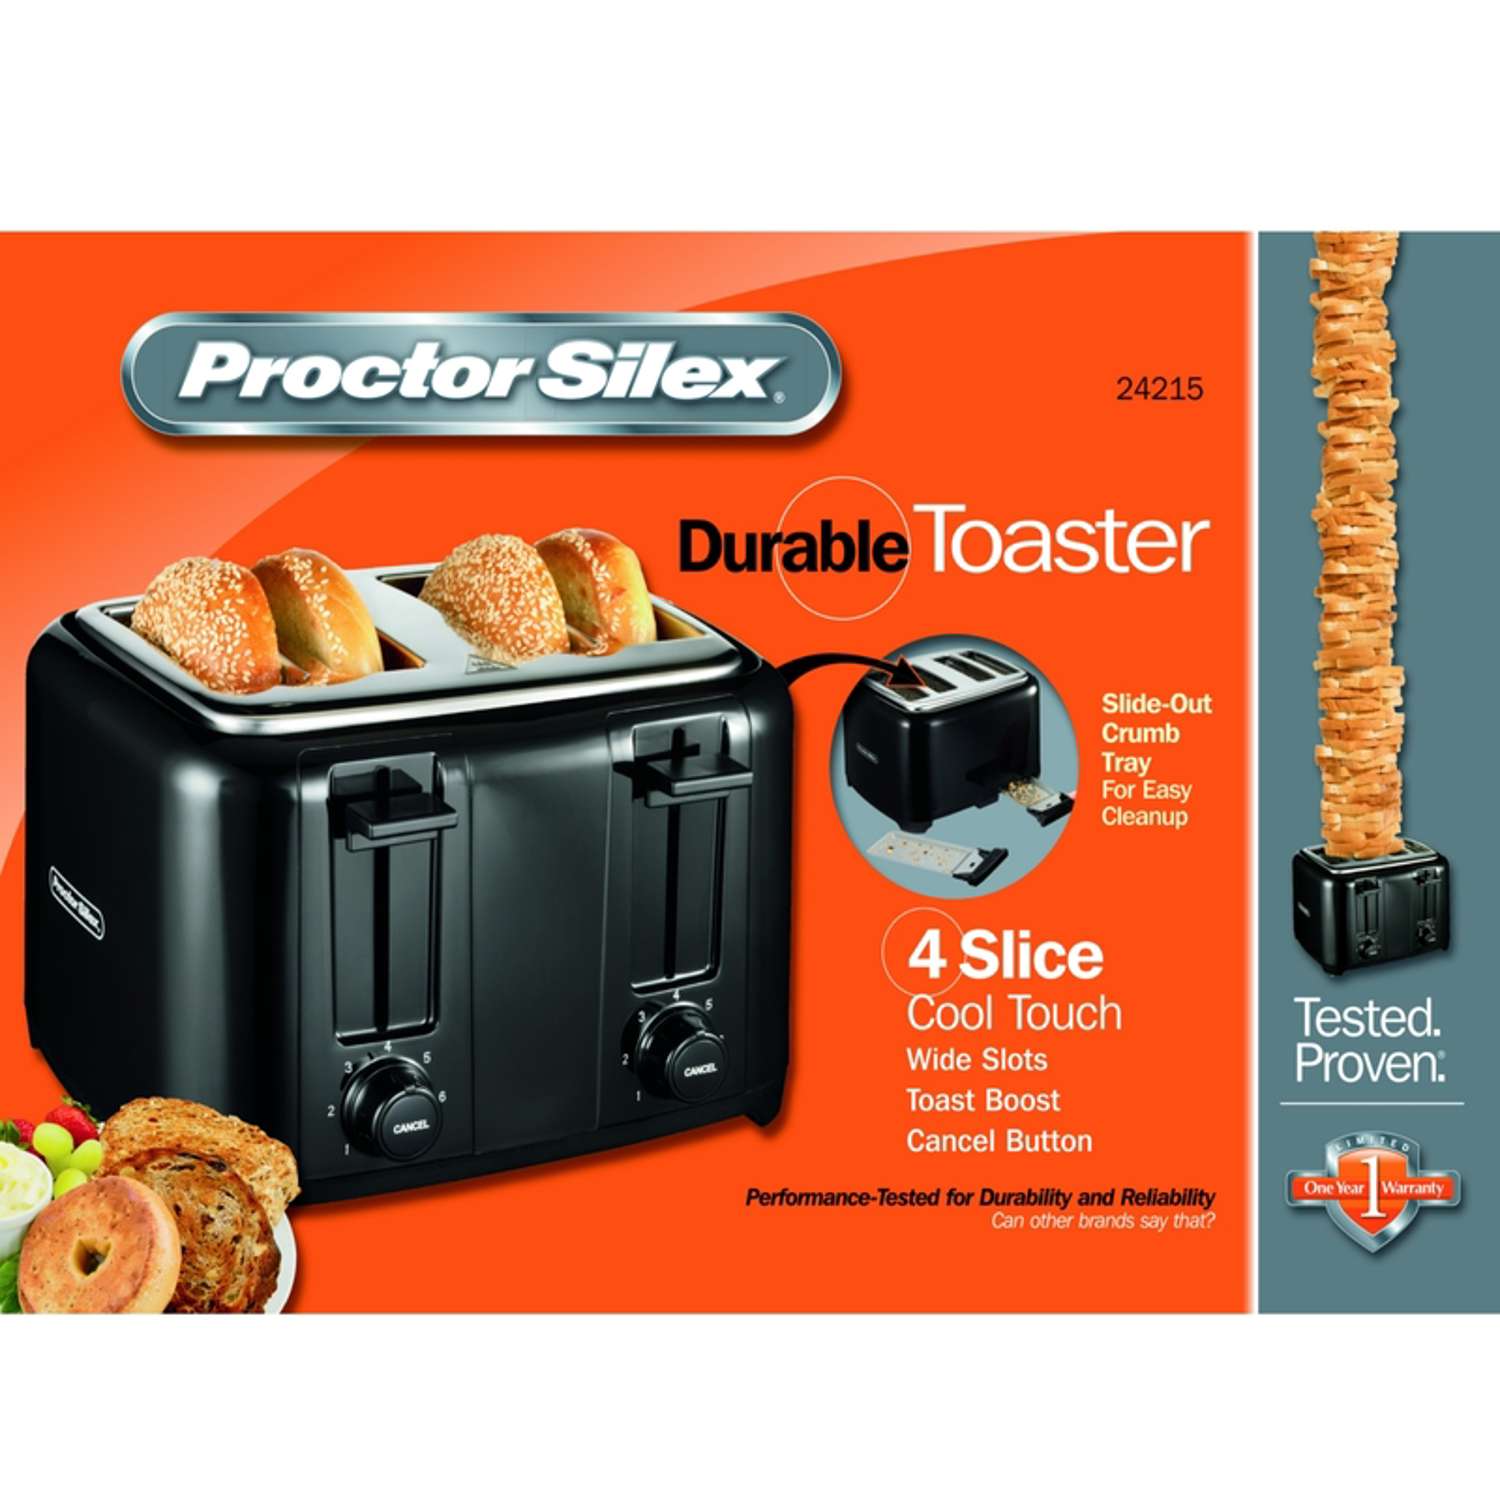 Proctor Silex Easy Slice Durable Electric Knife